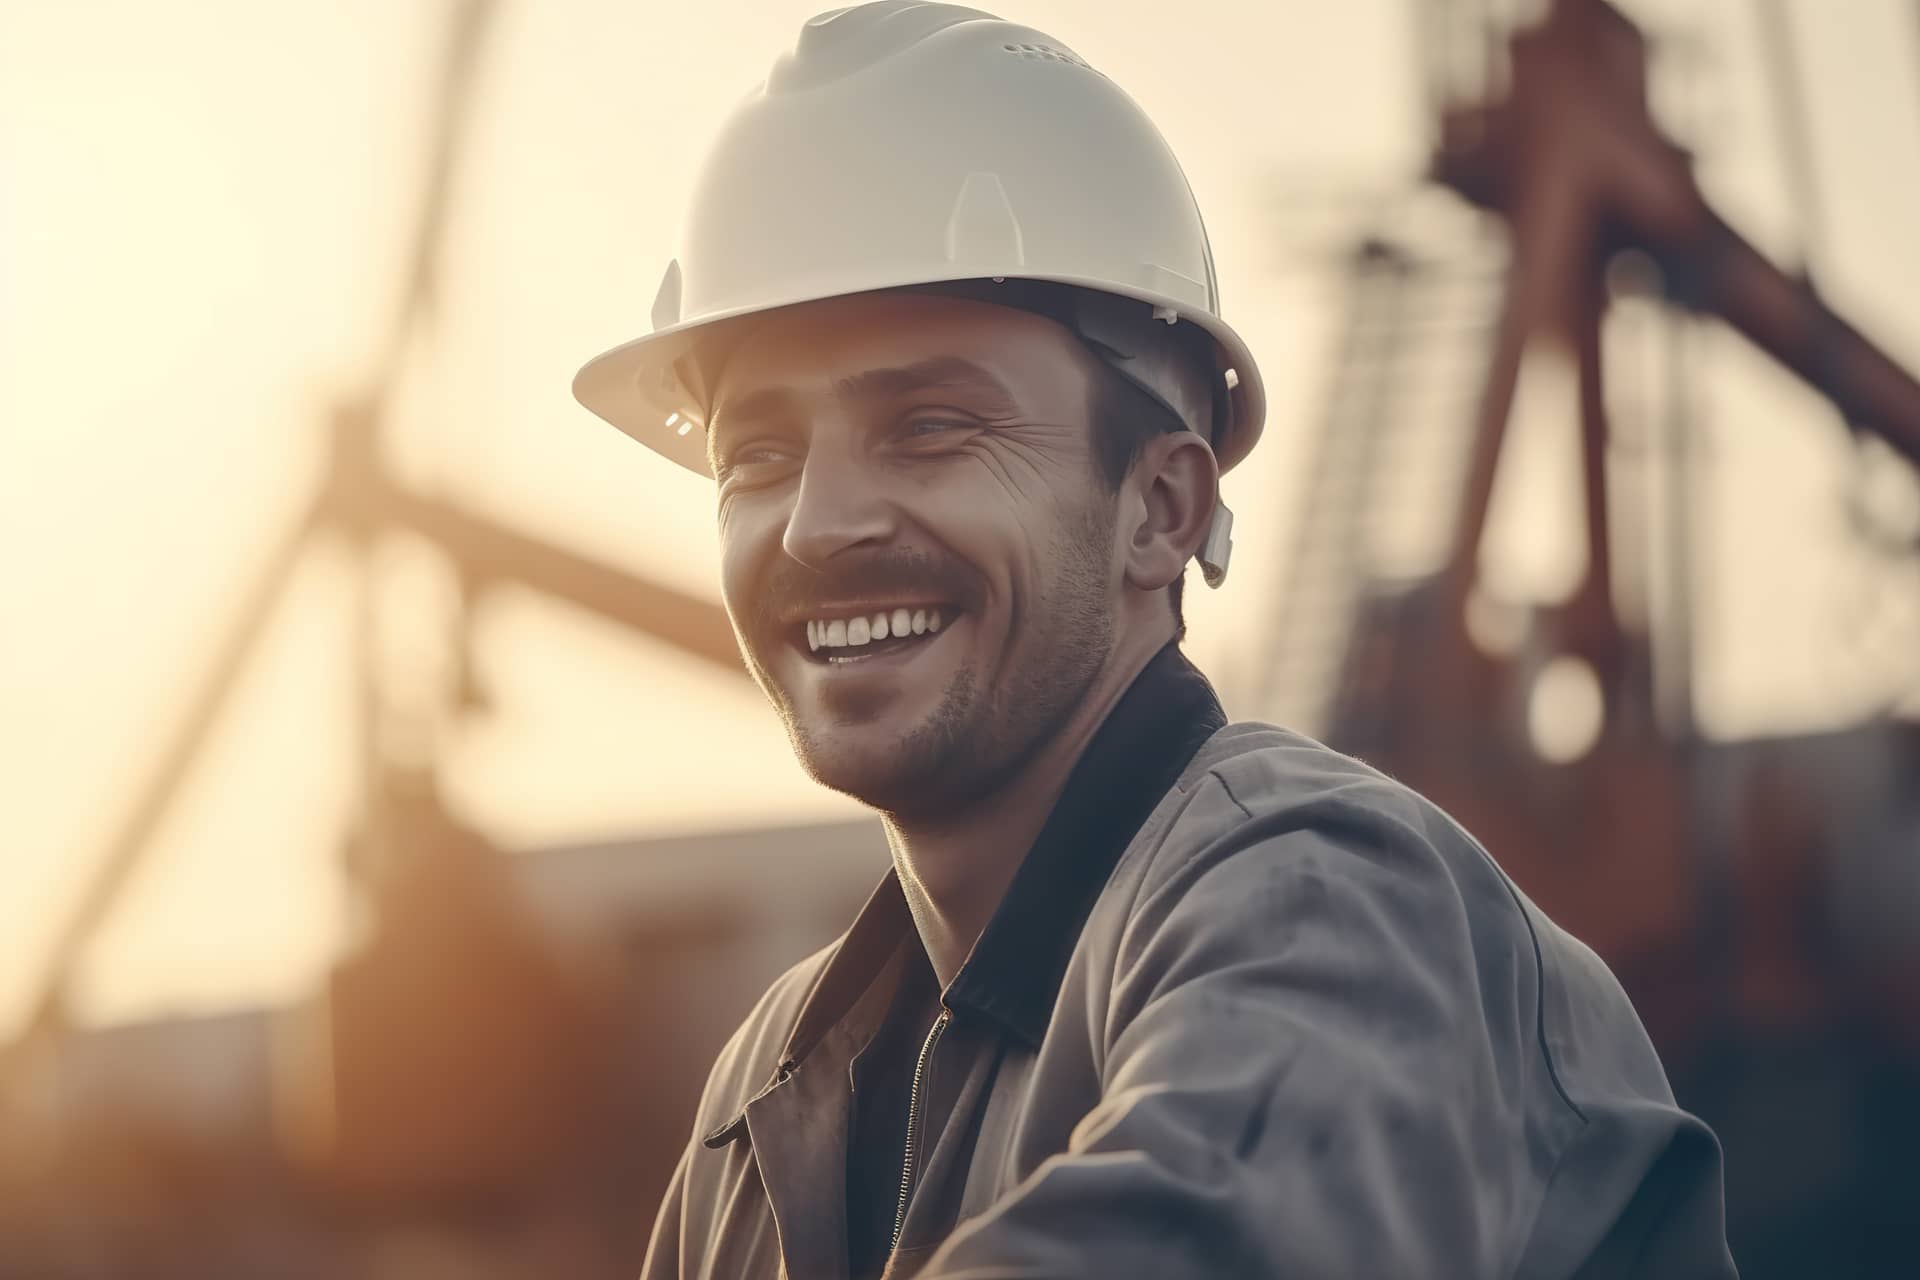 Man wearing hard hat smiles camera while standing construction site